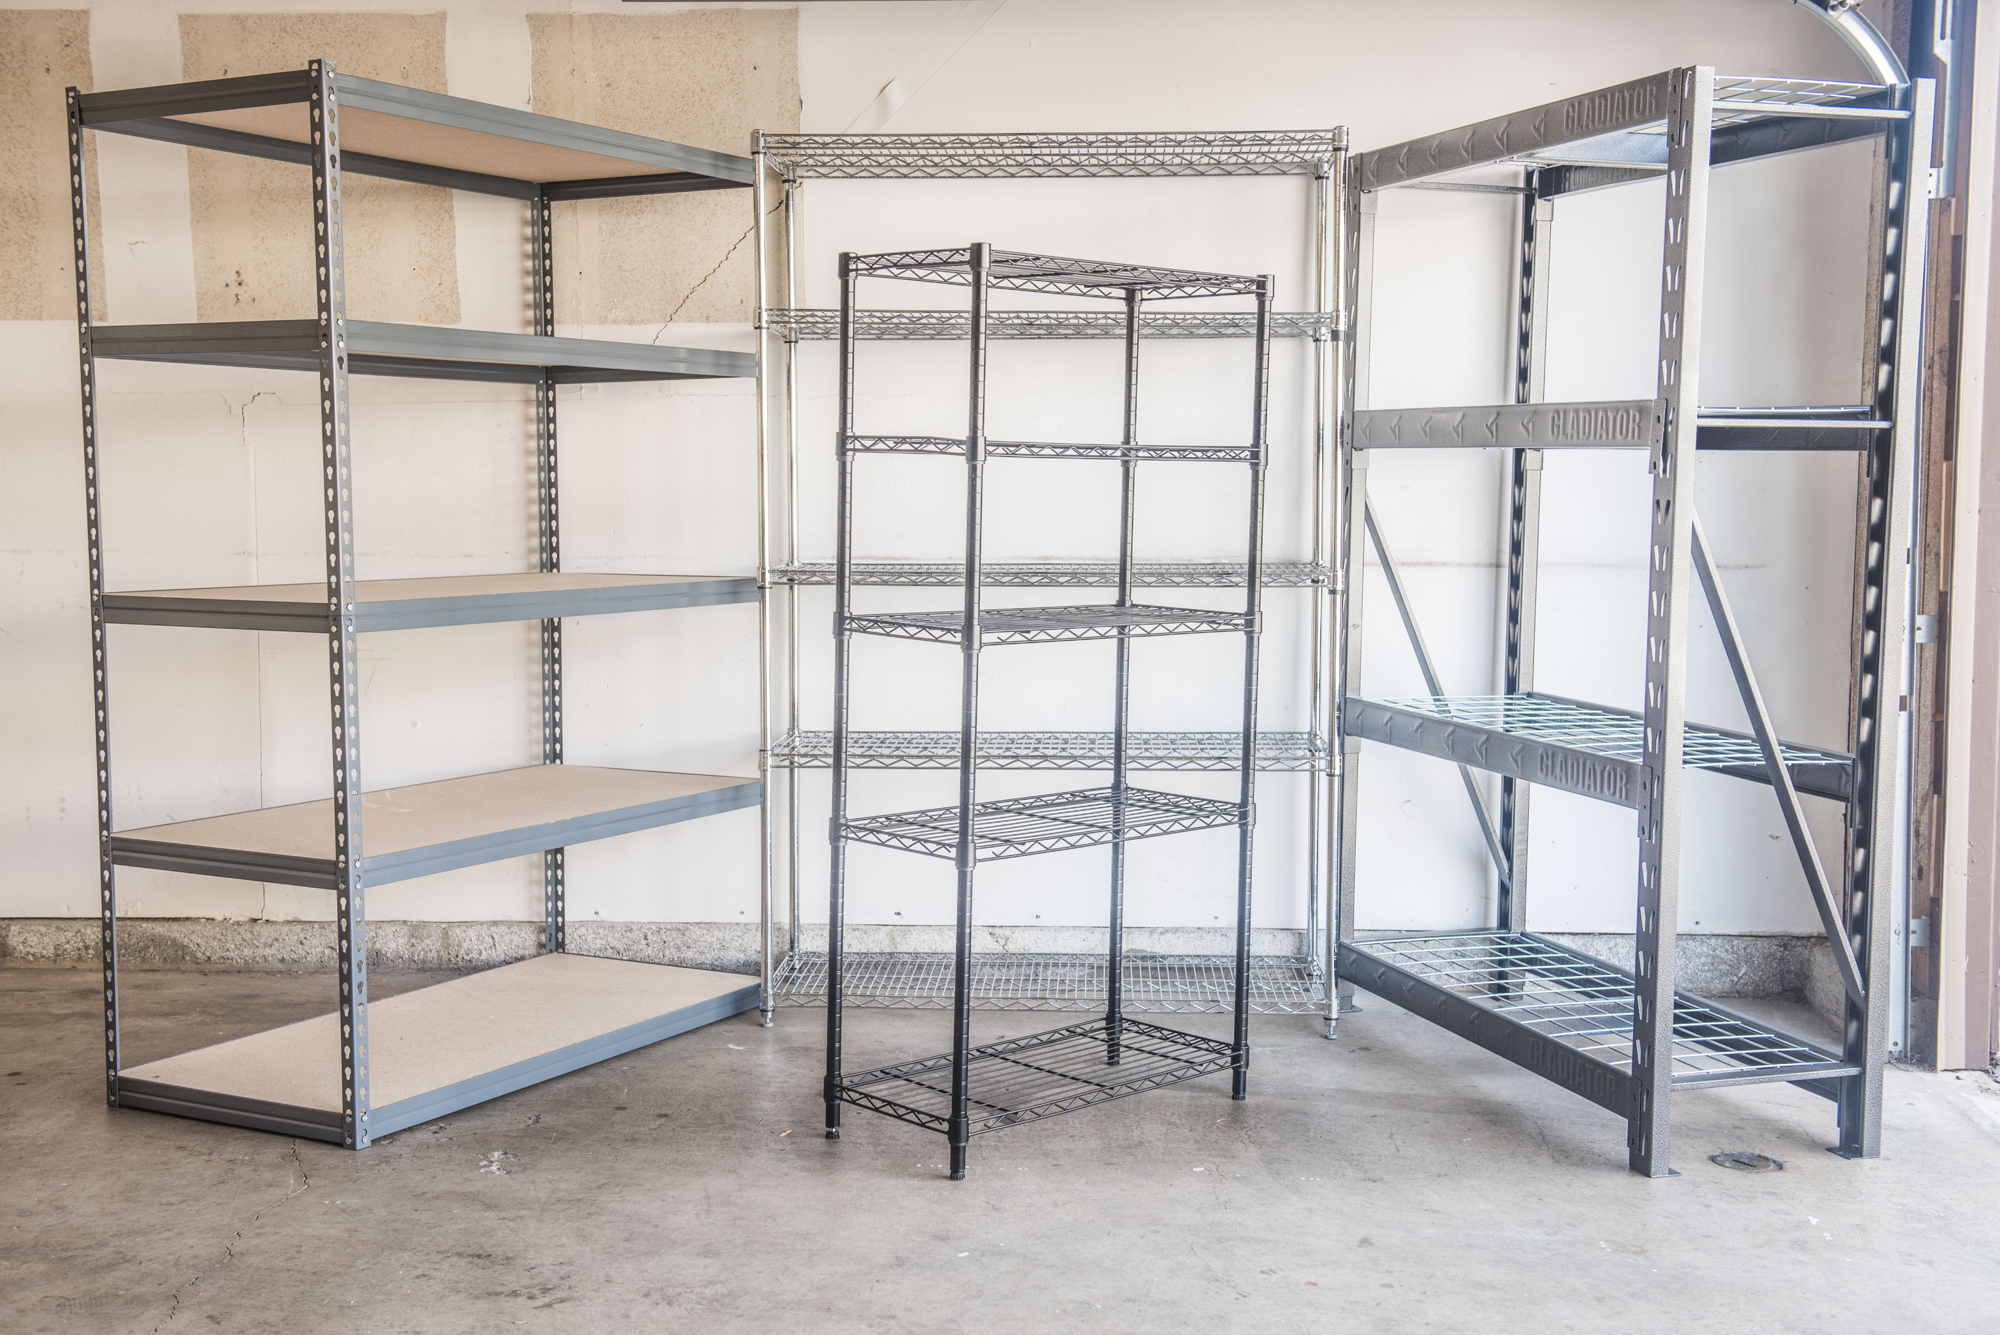 The Best Garage Shelving Of 2021, How To Install Wire Shelving Garage